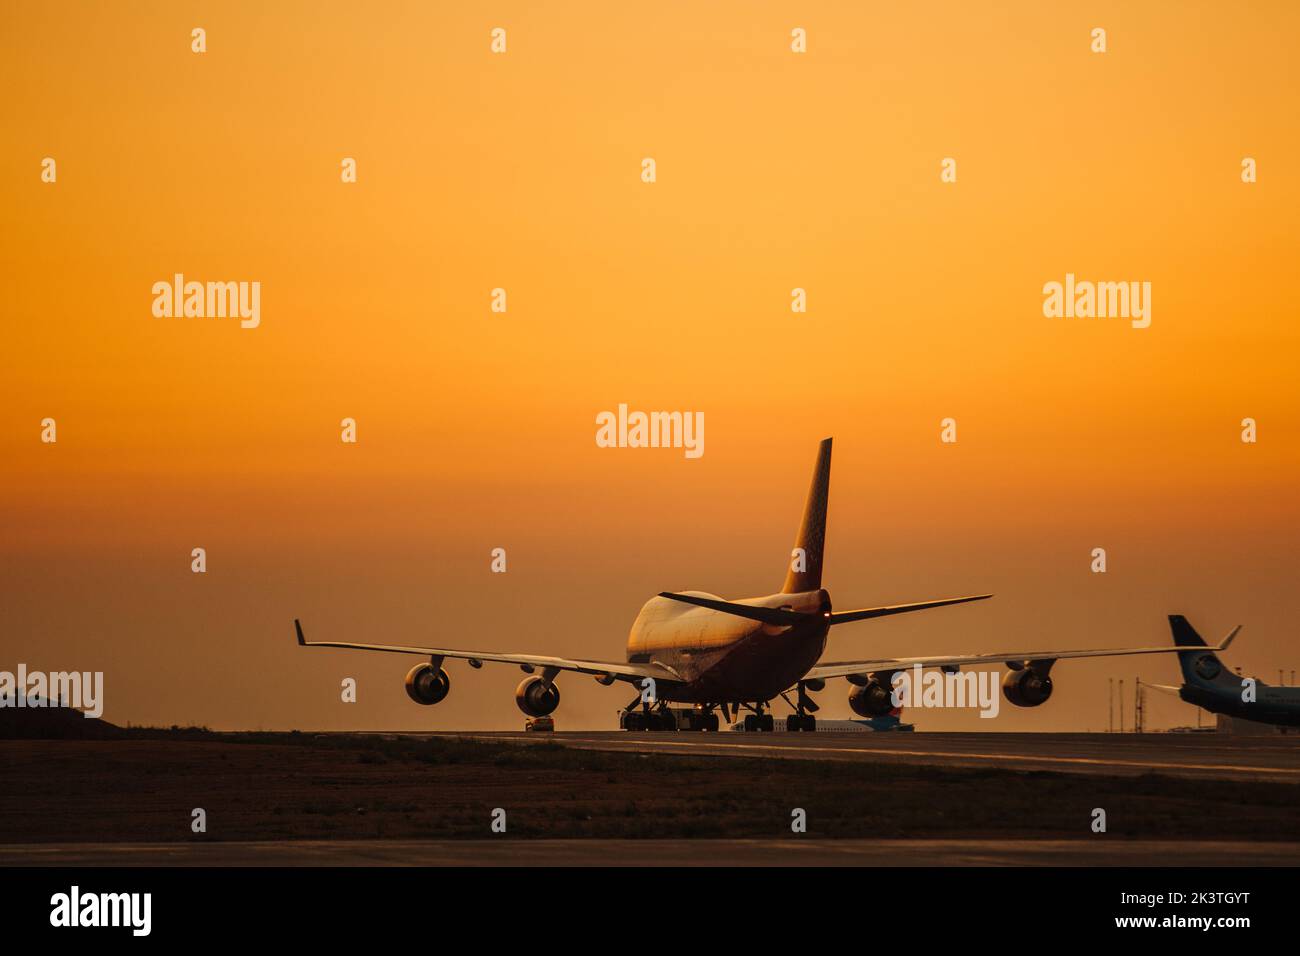 Passenger airplane take off from airport runway against the backdrop of a picturesque evening sky with sun rays. Stock Photo